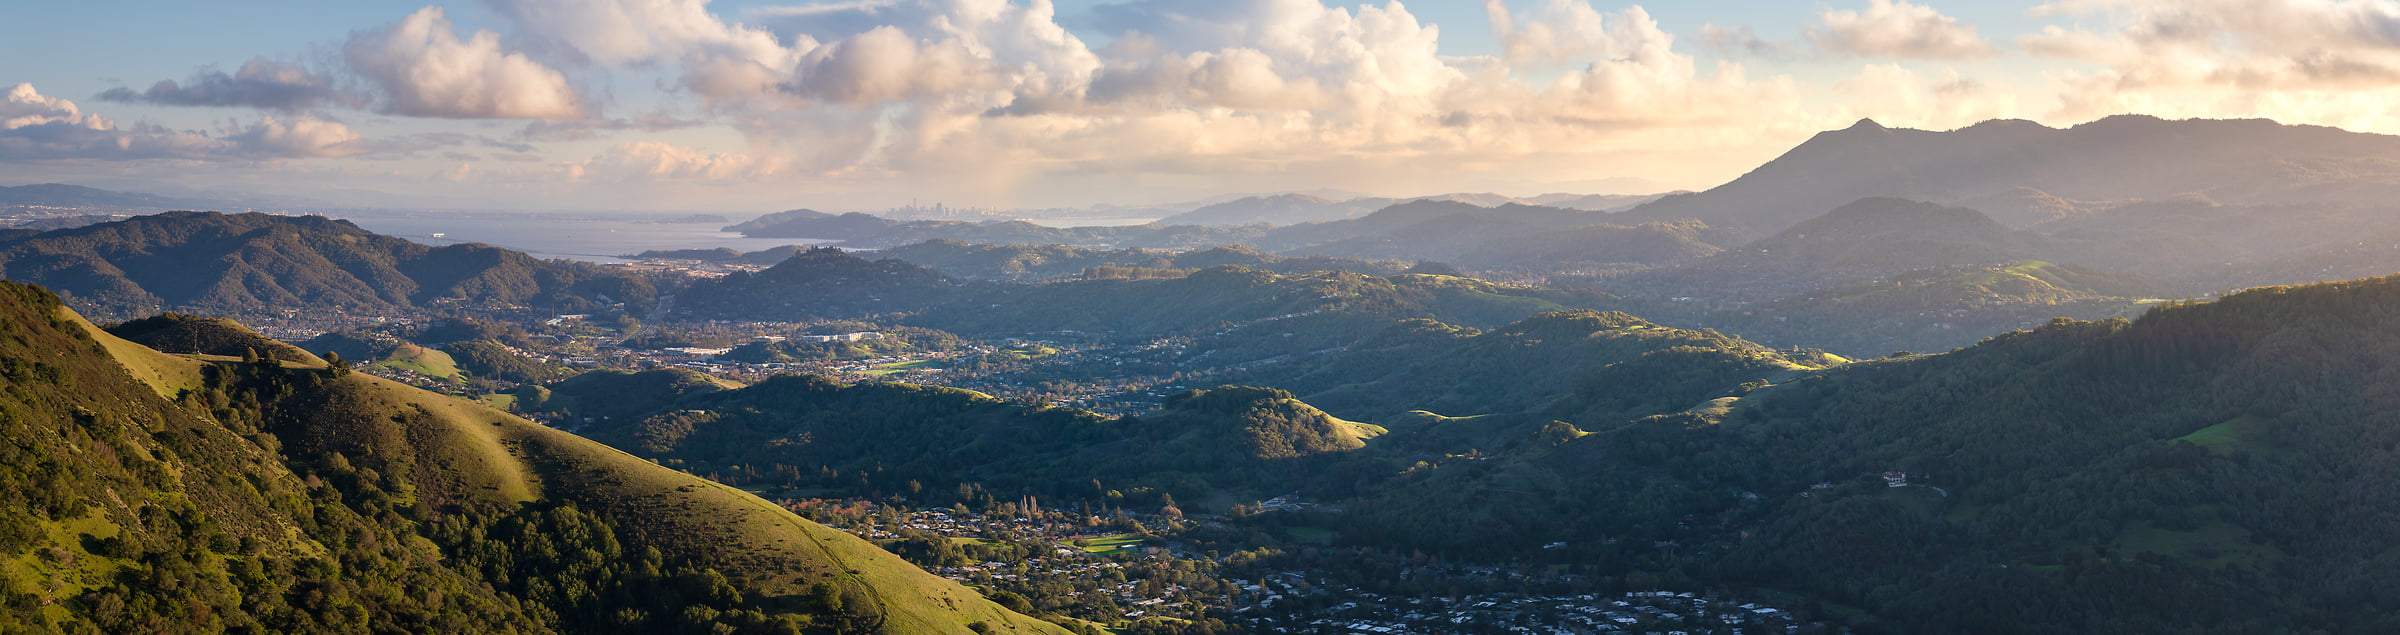 269 megapixels! A very high resolution, large-format VAST photo print of Marin County in the San Francisco bay area; panorama photograph created by Jeff Lewis in Marin County, California.